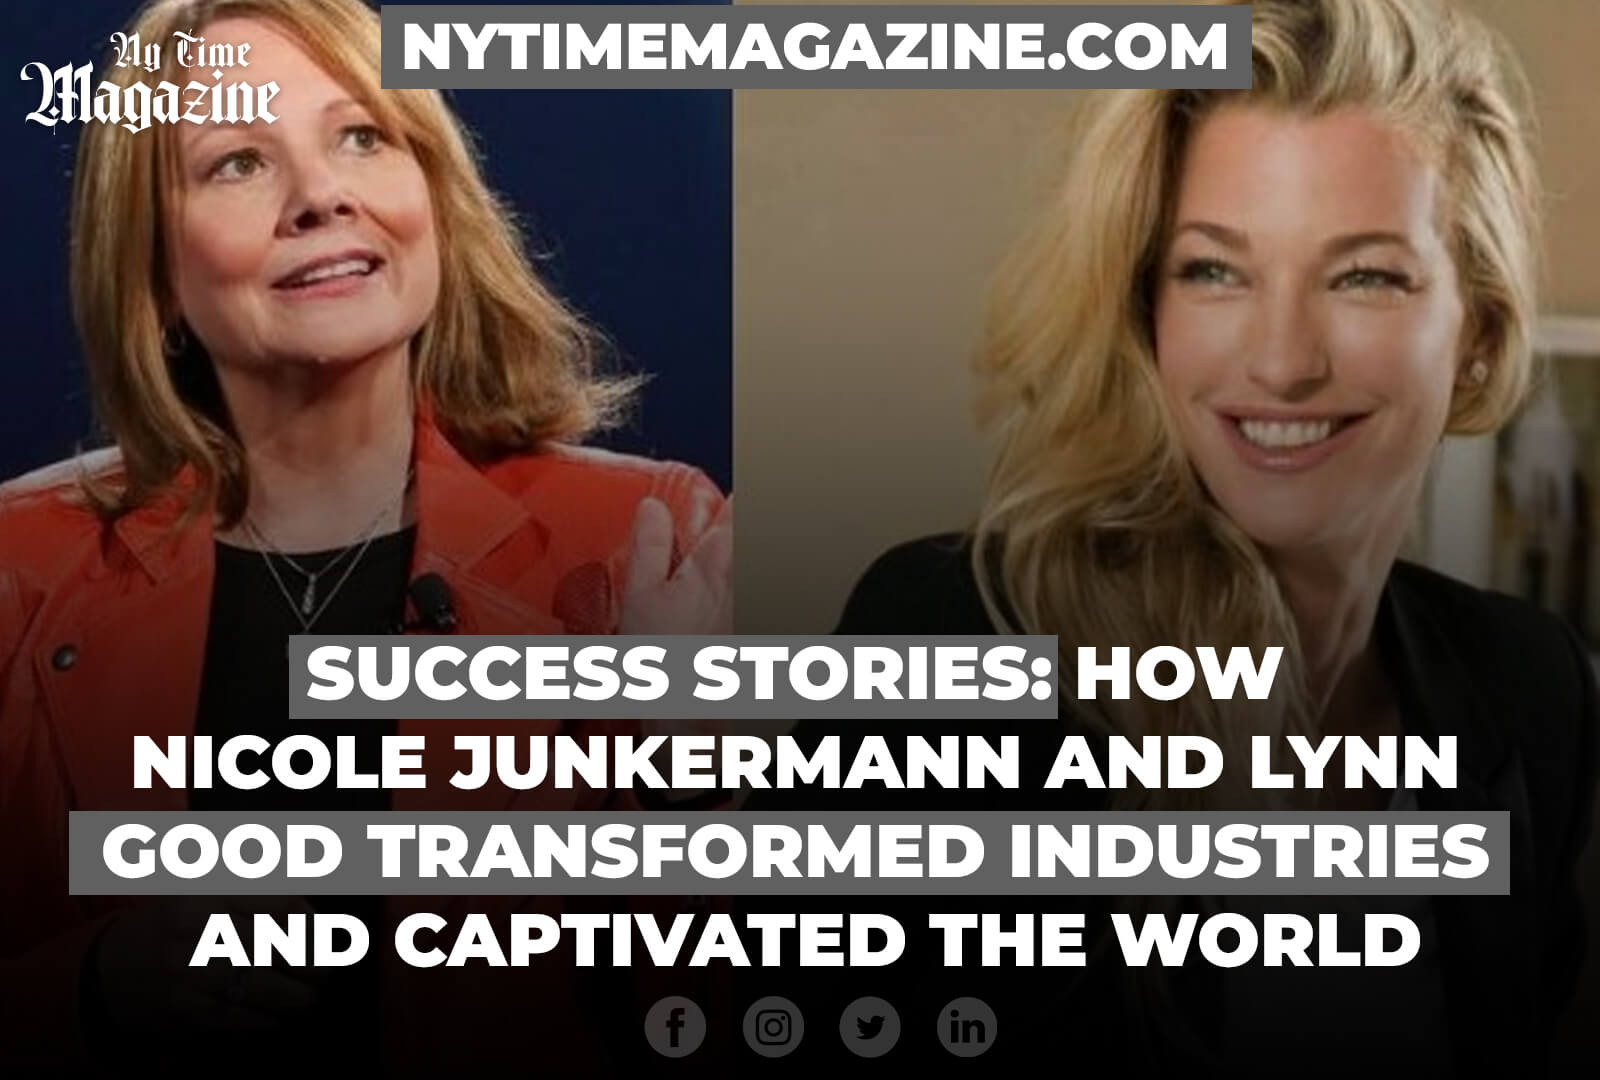 SUCCESS STORIES: HOW NICOLE JUNKERMANN AND LYNN GOOD TRANSFORMED INDUSTRIES AND CAPTIVATED THE WORLD